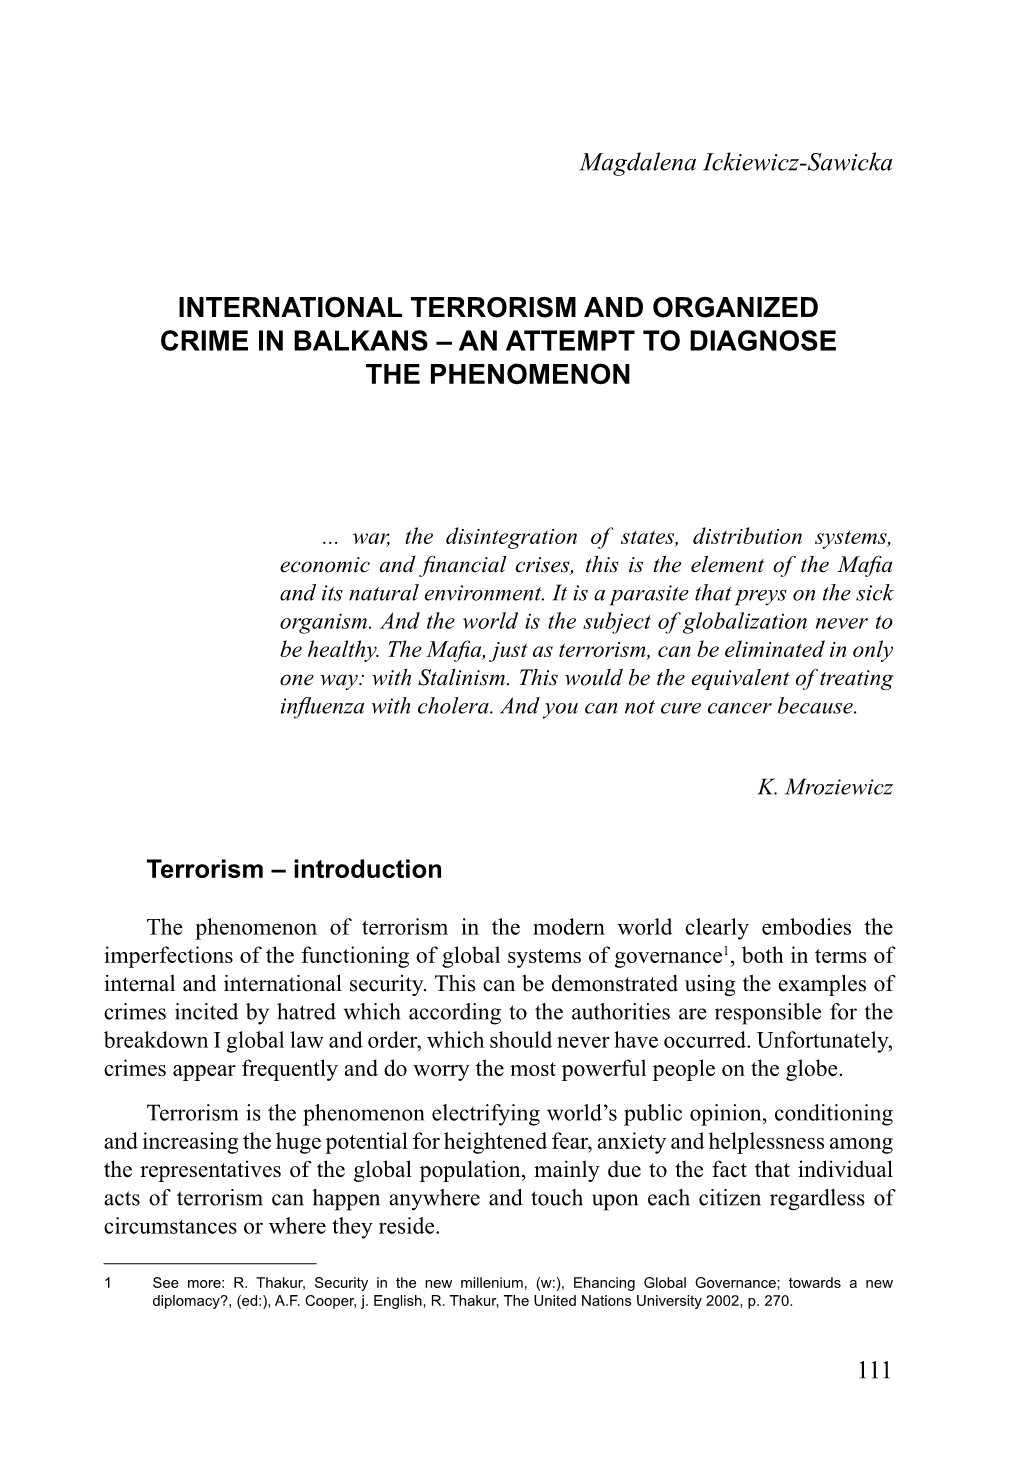 International Terrorism and Organized Crime in Balkans – an Attempt to Diagnose the Phenomenon